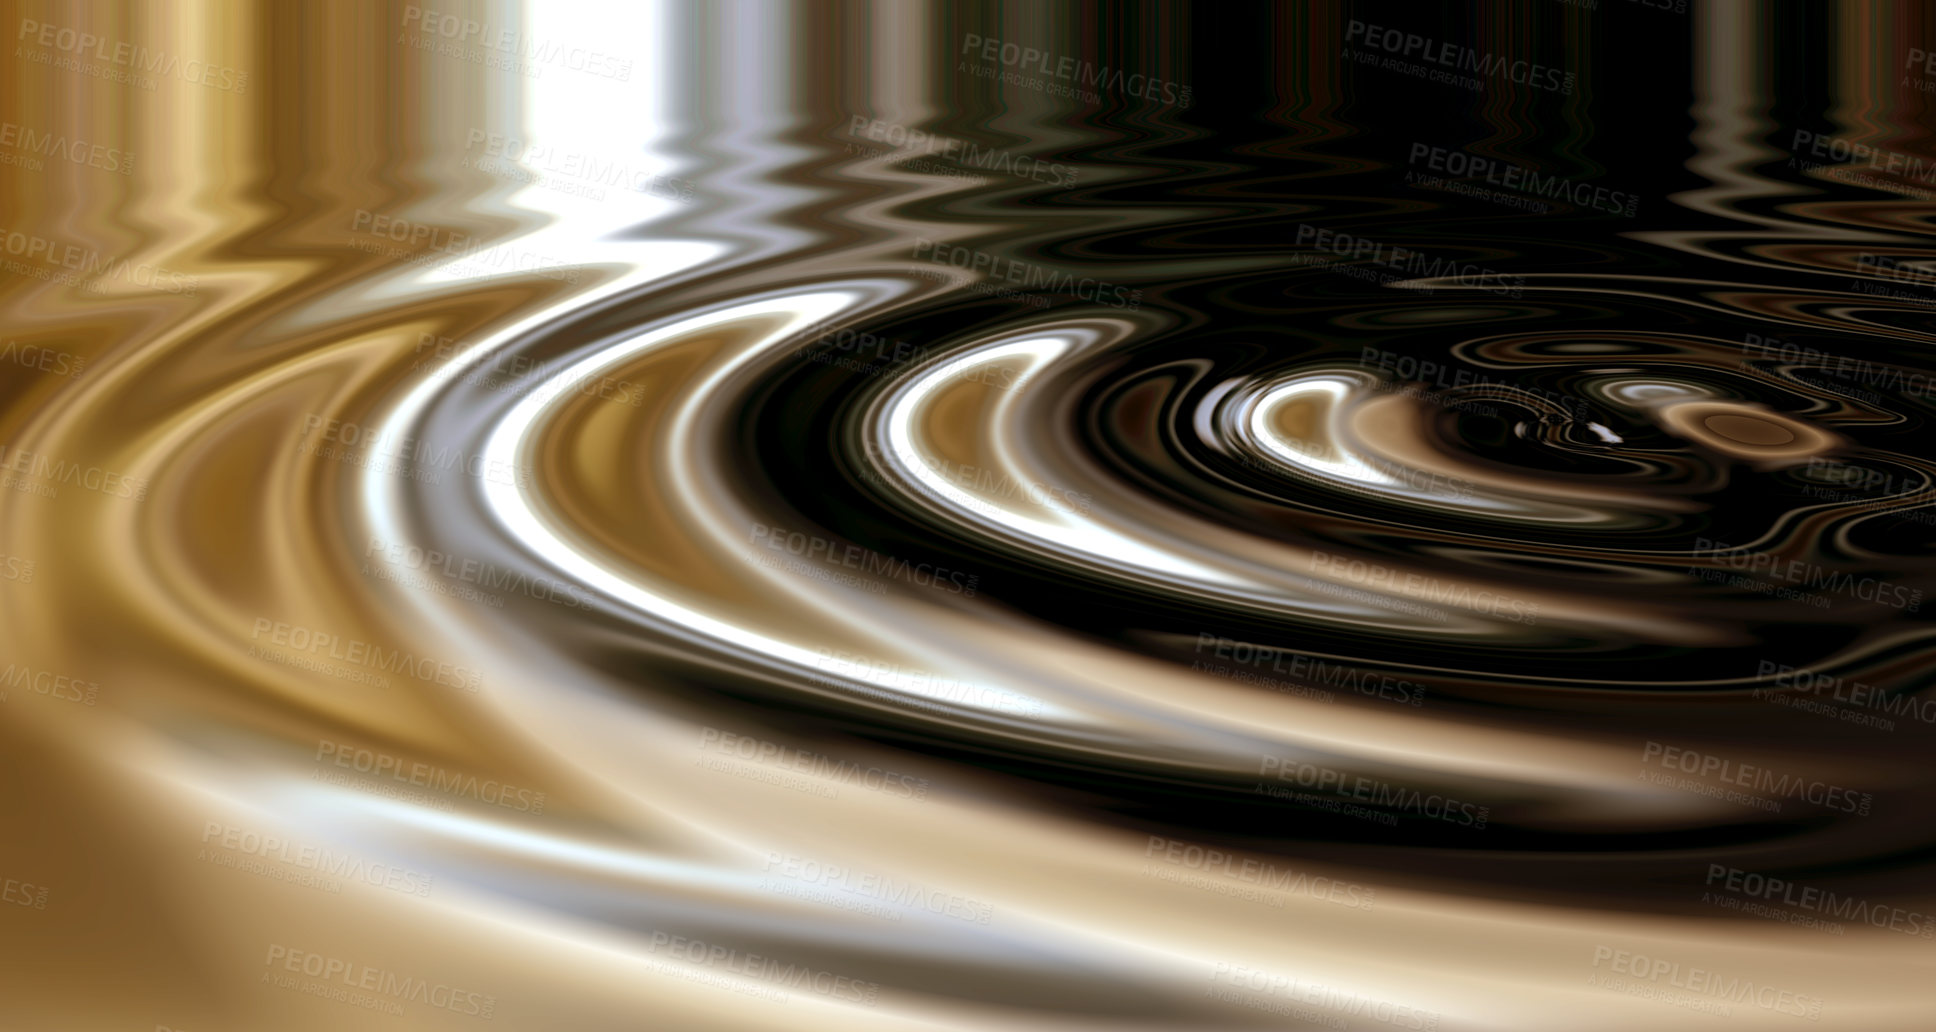 Buy stock photo 3D wallpaper of liquid ripples or silver shiny circular lines with a metallic reflection on the surface. Texture, effect and artistic pattern of movement in a chrome pool with glowing zen water 